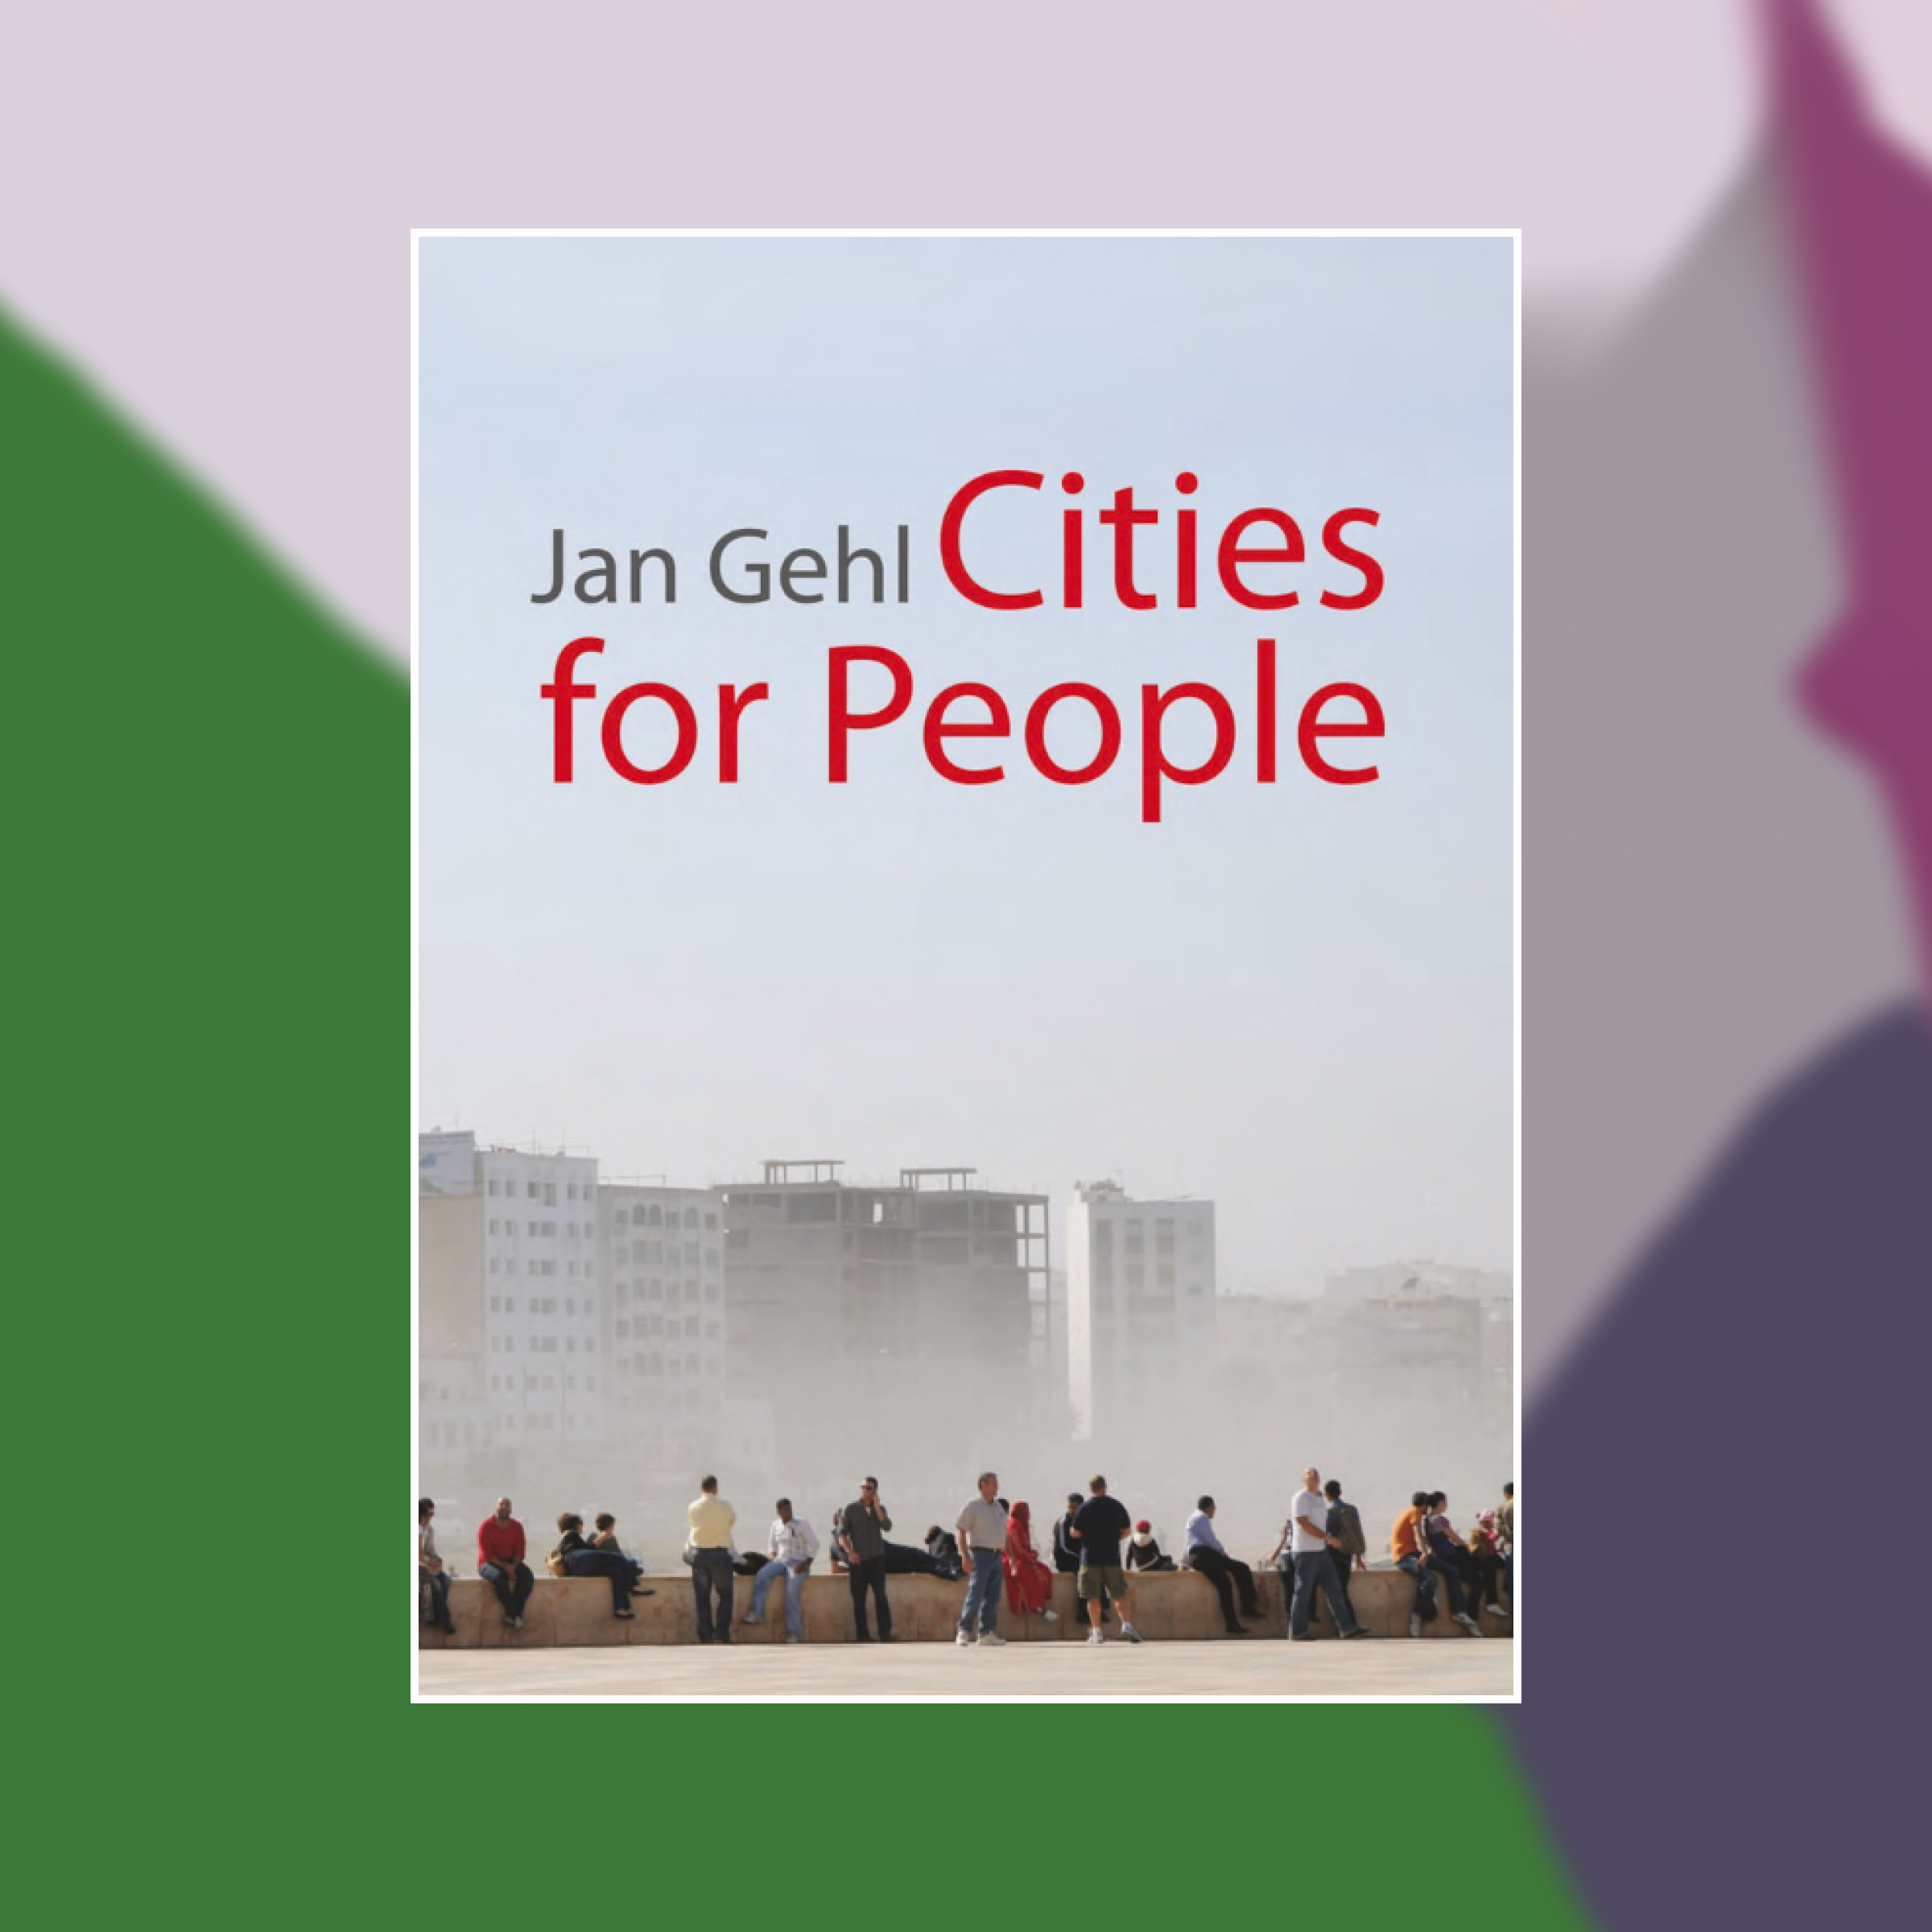 Book cover of Cities for People against a painted background